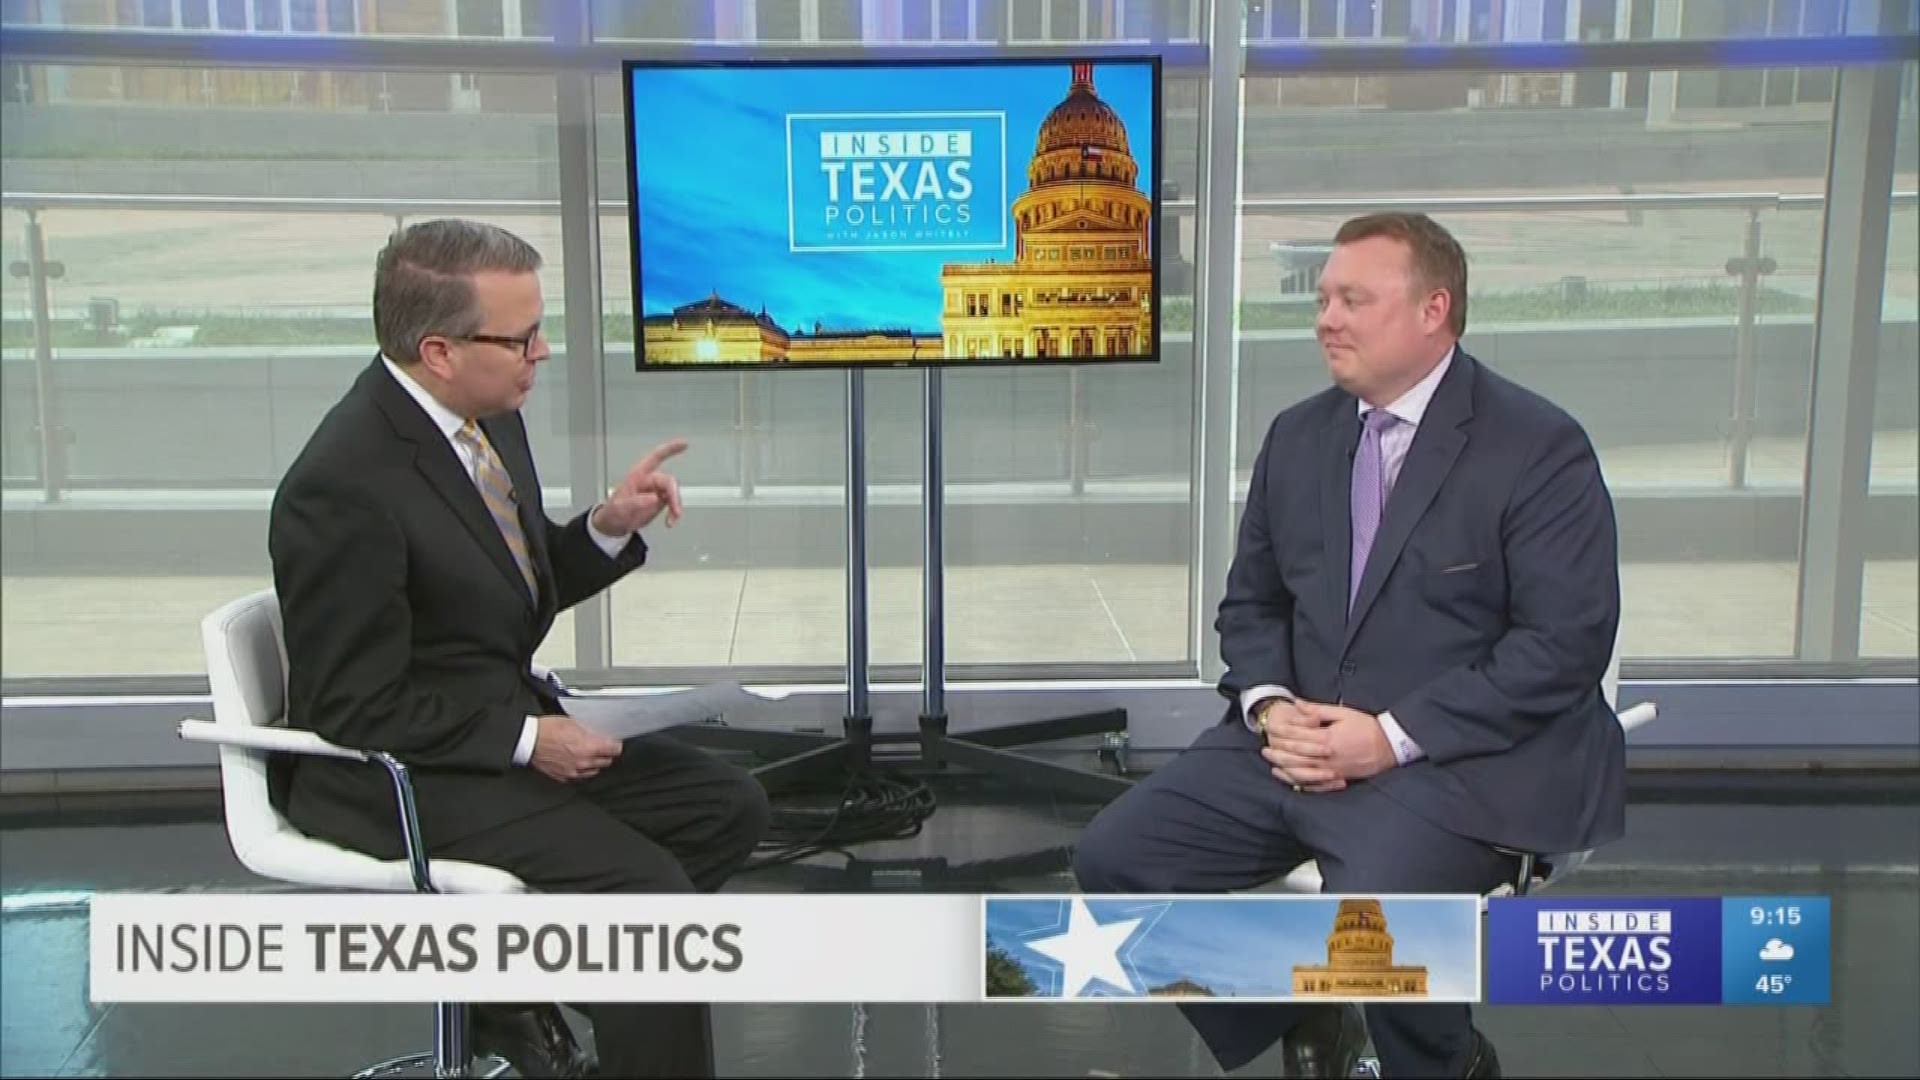 Republicans have decided not to have candidates run against prominent Texas Democrats in 2020. GOP consultant Matt Mackowiak joined Jason Whitely to discuss why.